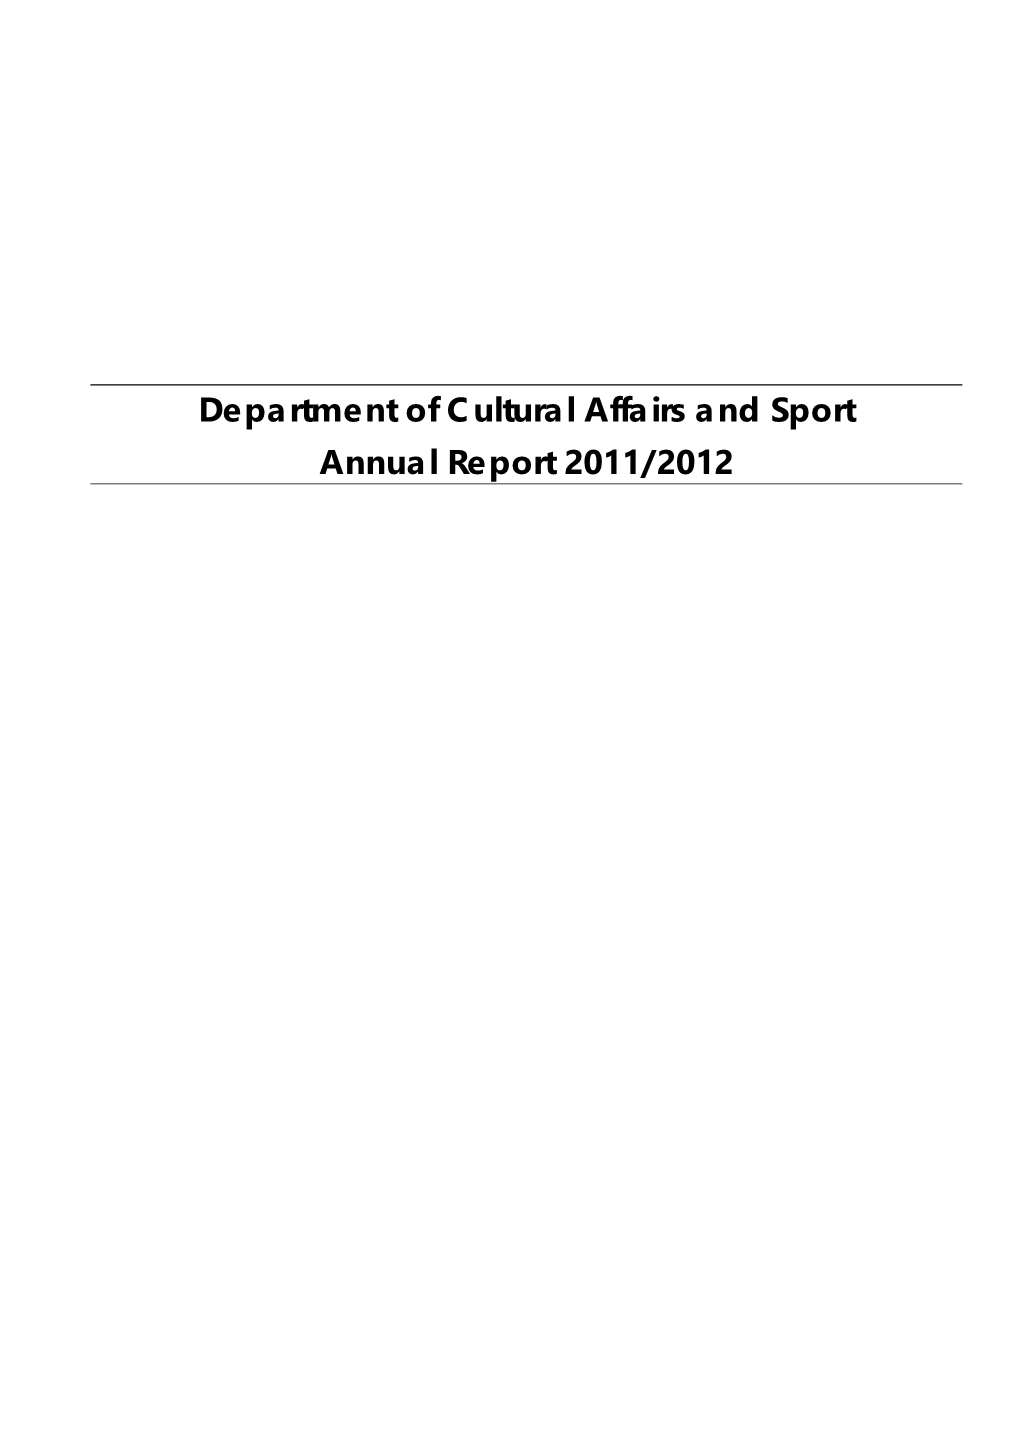 Department of Cultural Affairs and Sport Annual Report 2011/2012